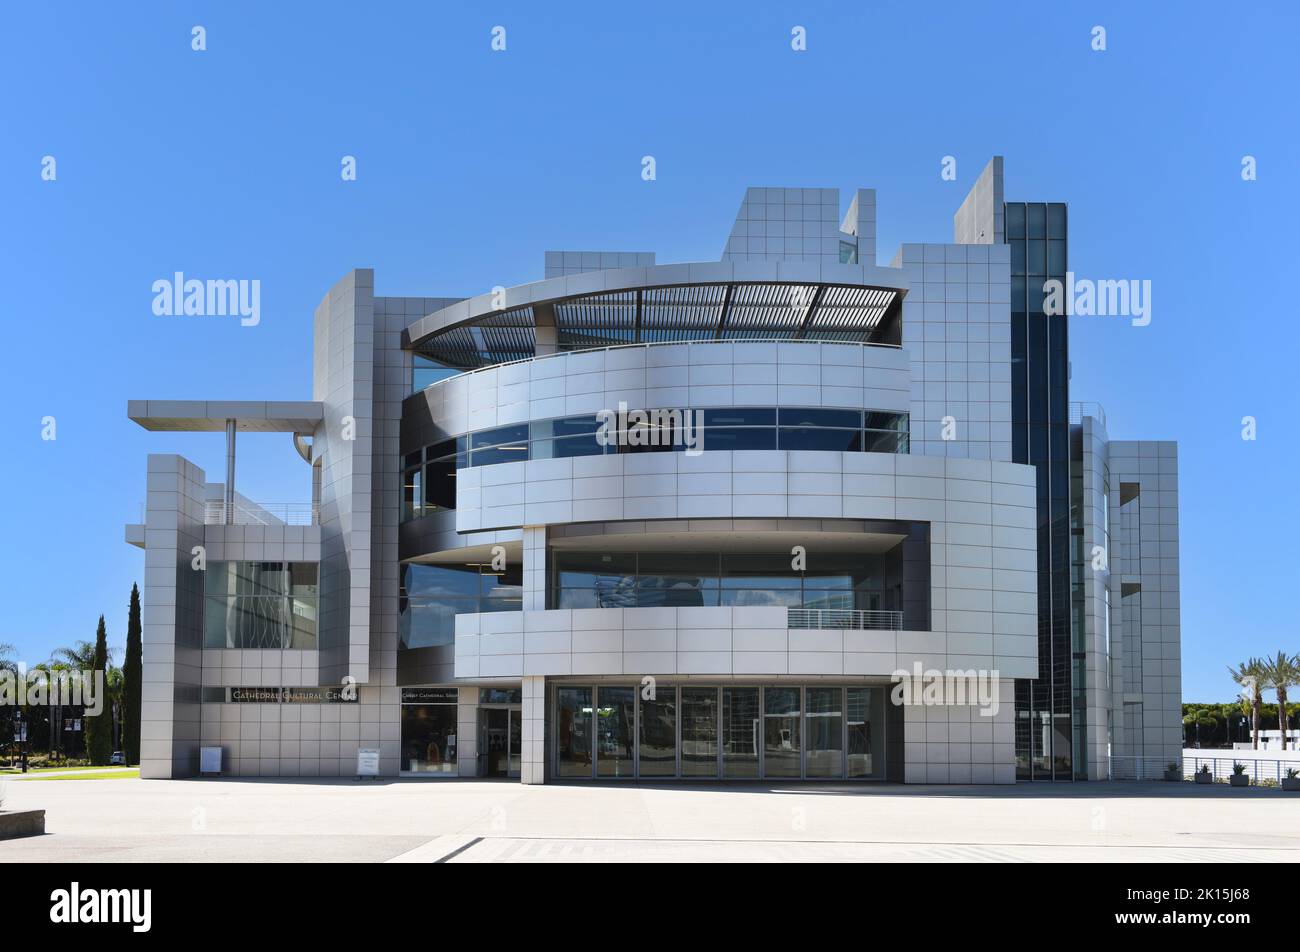 GARDEN GROVE, CALIFORNIA - 20 MAR 2021: The Cultural Center at the Crystal Cathedral. Stock Photo